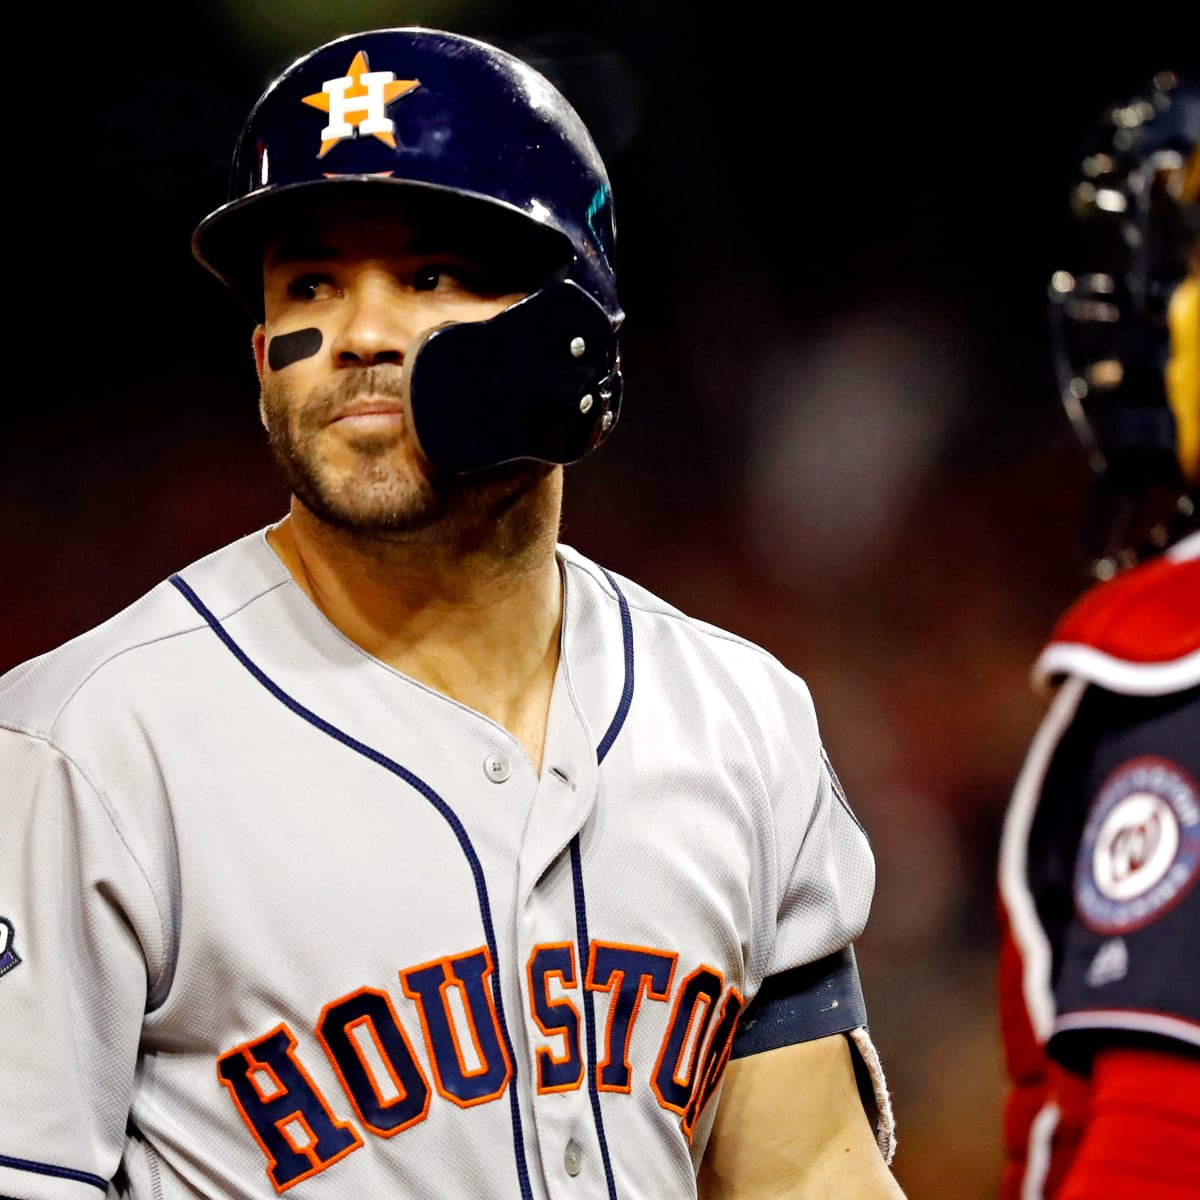 Astros cheating scandal could have legal consequences - Sports